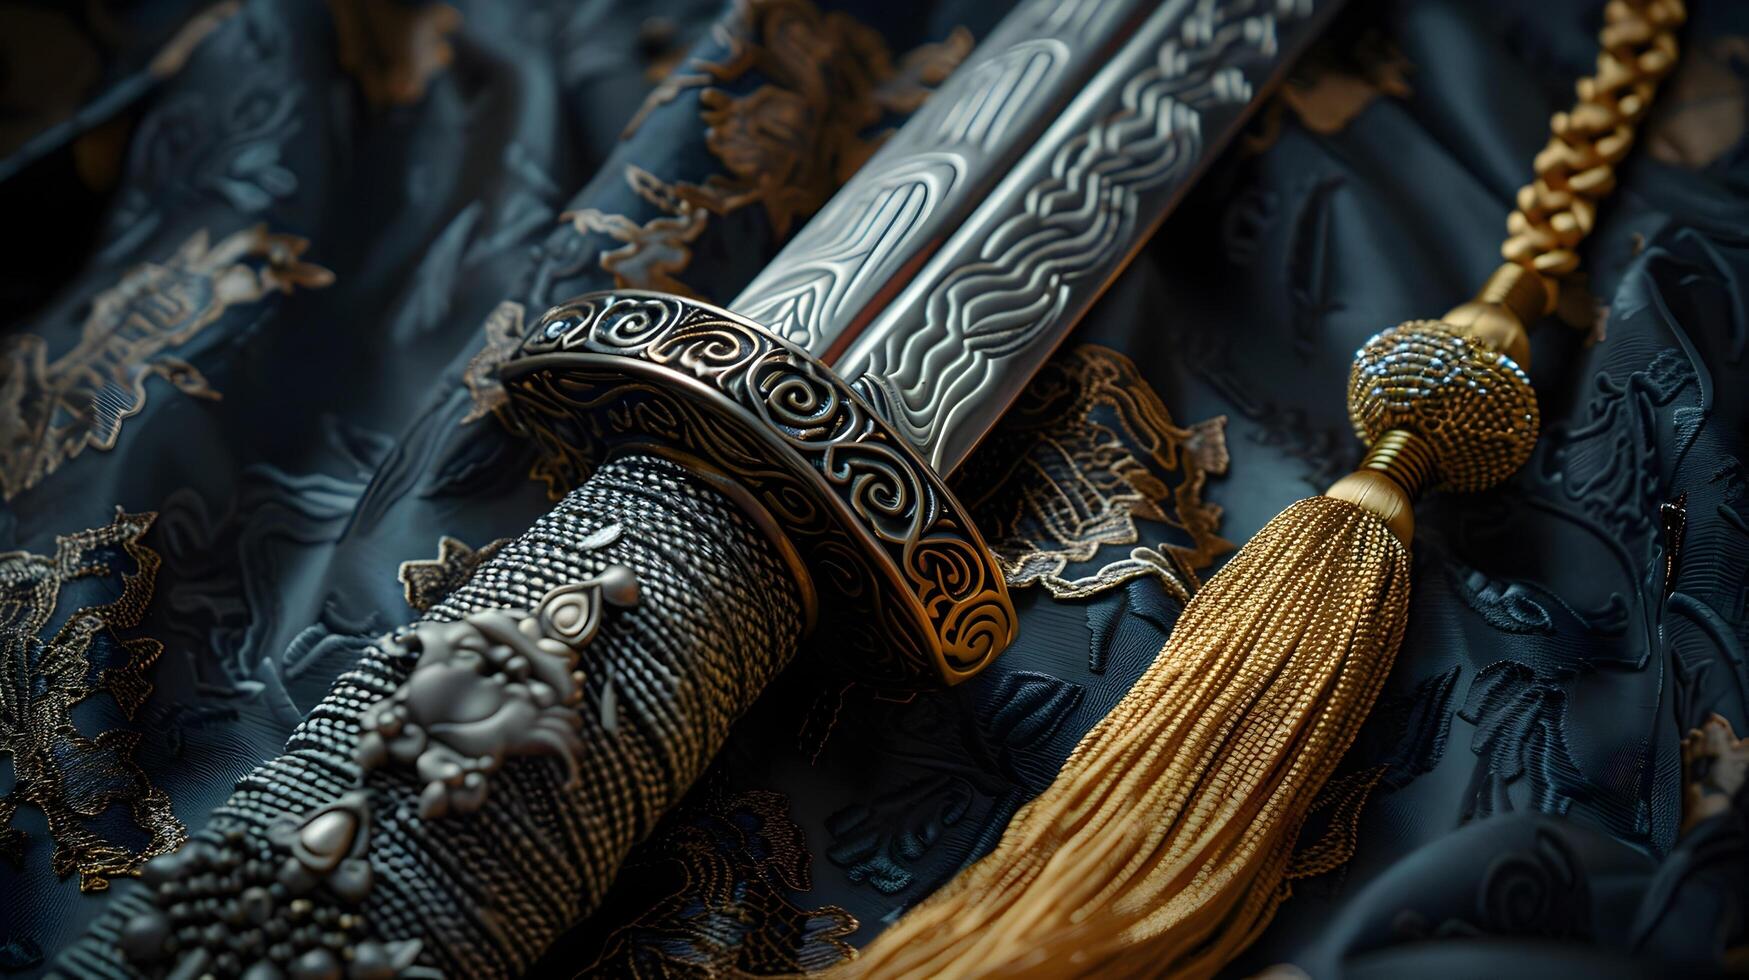 Ceremonial Sword with Ornate Gold Tassel Symbolizing Honor and Tradition photo